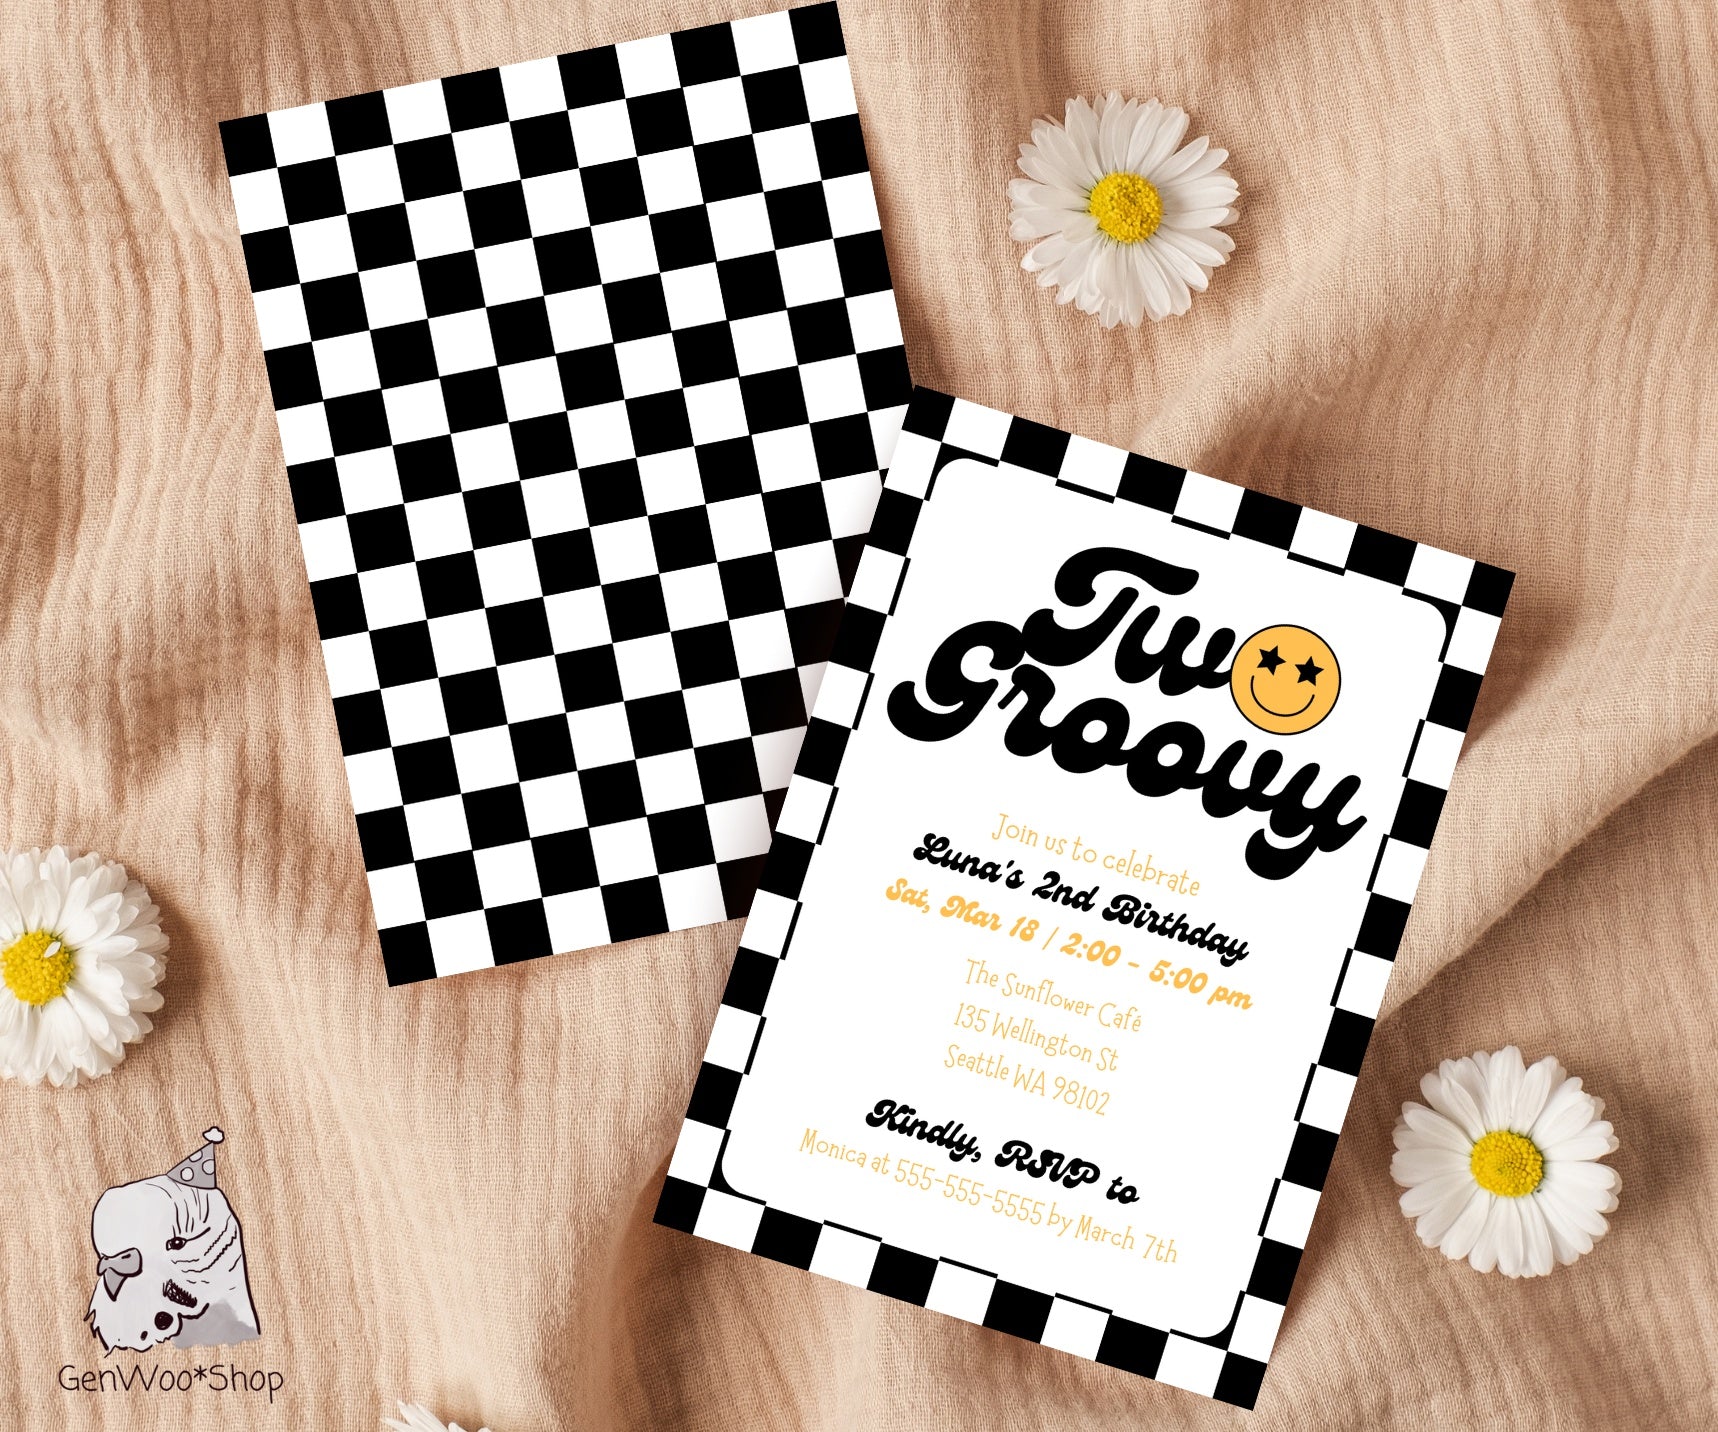 Editable Digital Black Checkered Two Groovy 2nd Birthday Party Invitation Canva Template With Yellow Smile Face